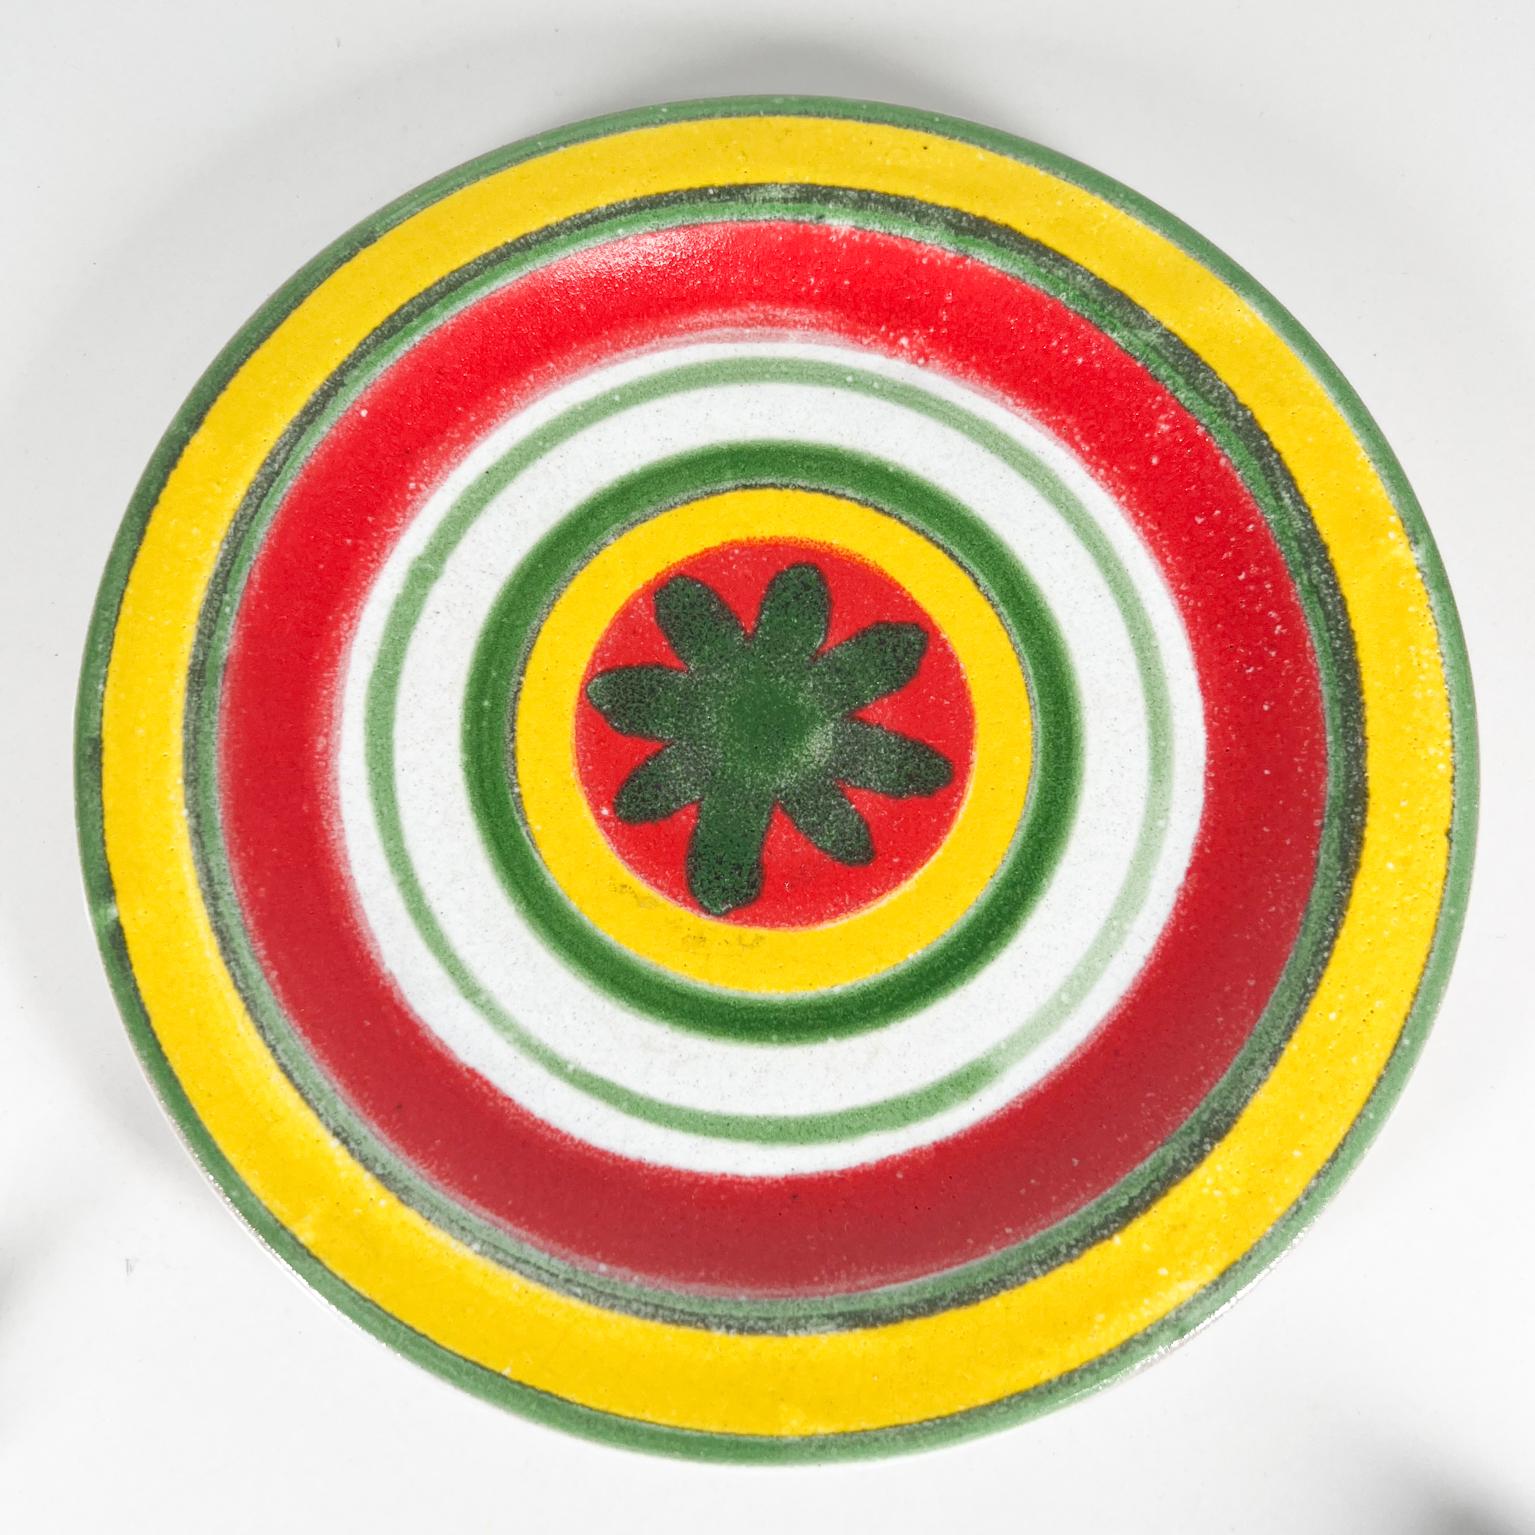 1960s Desimone ceramic pottery Italy Art Plate
Hand painted in Yellow Red and Green 
Giovanni Desimone Italy
8.38 diameter x .75 tall
Inscription: Desimone Italy 64/15 AC
Original vintage condition.
Refer to images.
 

